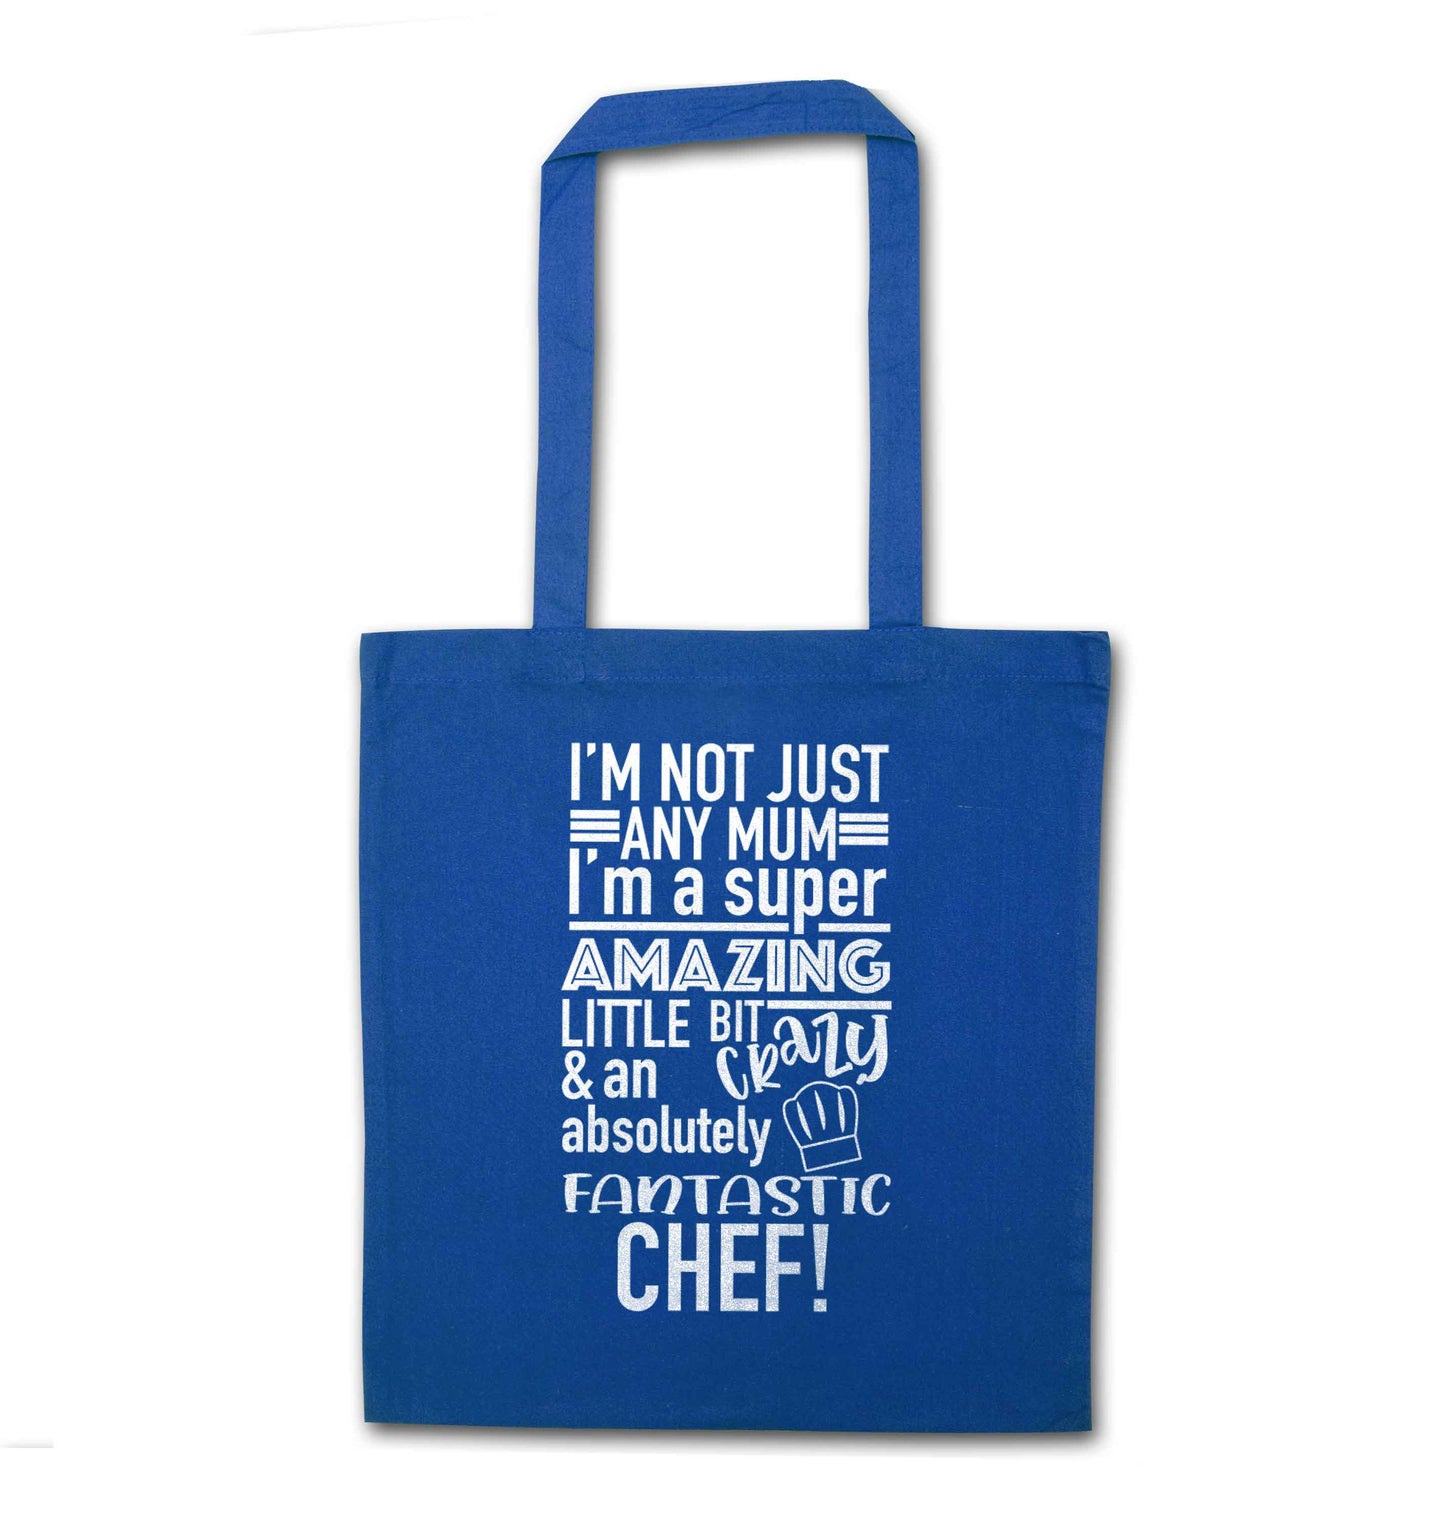 I'm not just any mum I'm a super amazing little bit crazy and an absolutely fantastic chef! blue tote bag